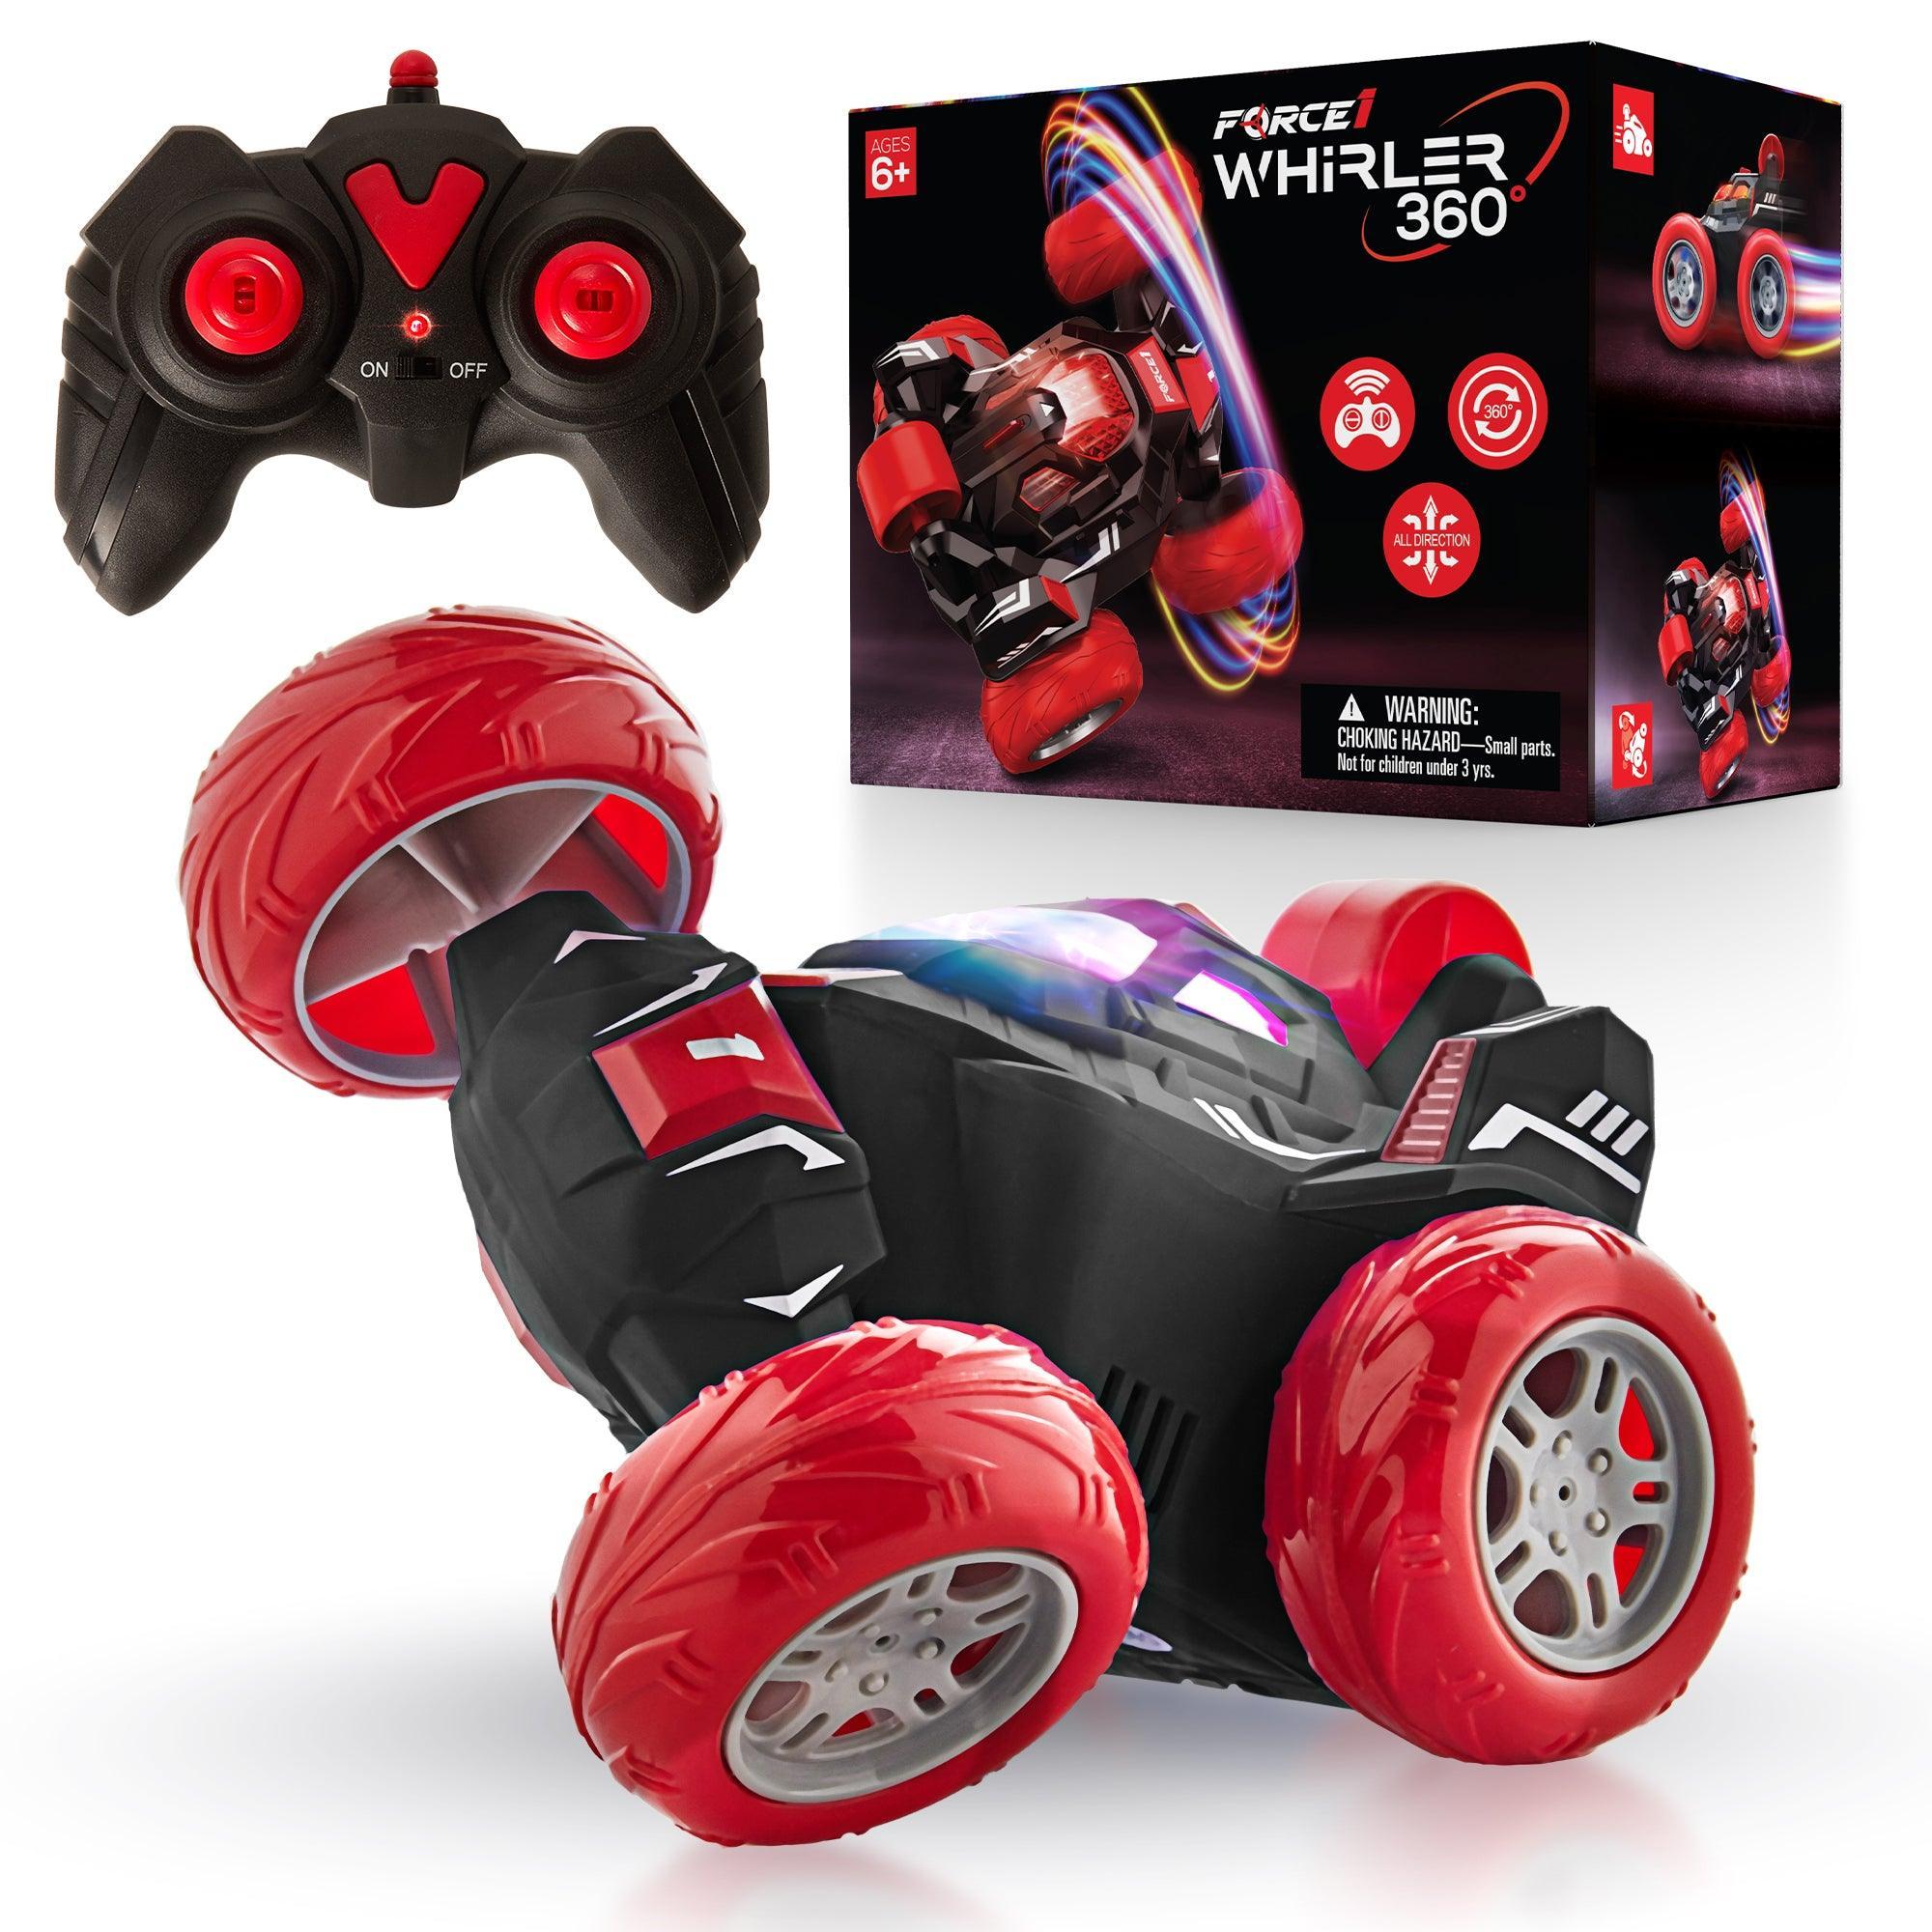 Rev up the fun with the RC Stunt 360 car!